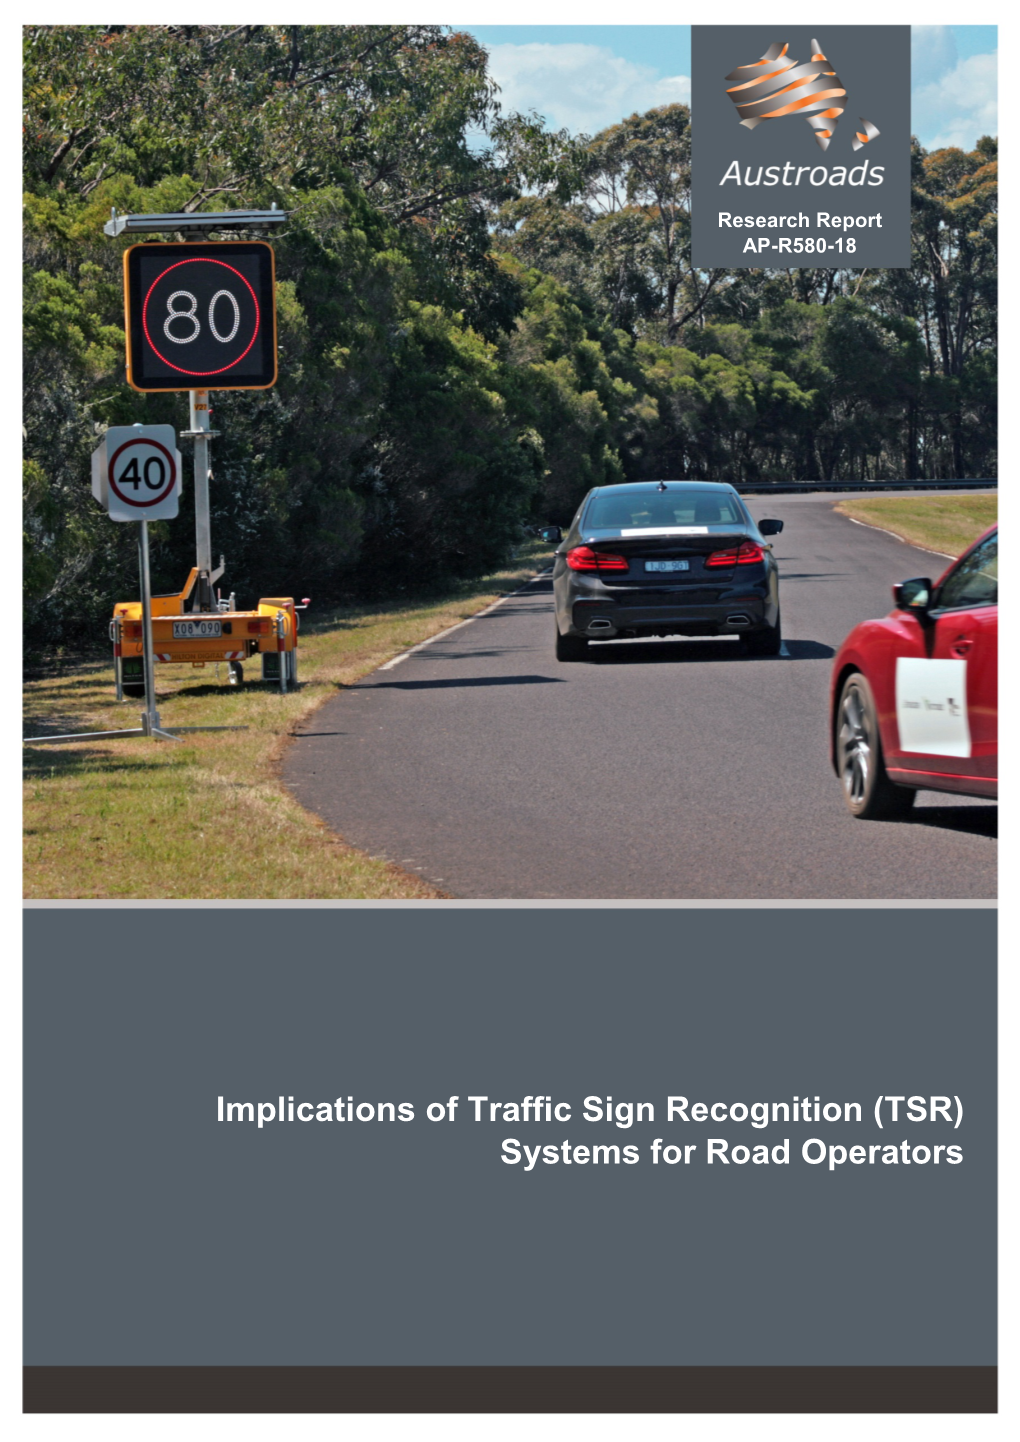 Implications of Traffic Sign Recognition (TSR) Systems for Road Operators Implications of Traffic Sign Recognition (TSR) Systems for Road Operators